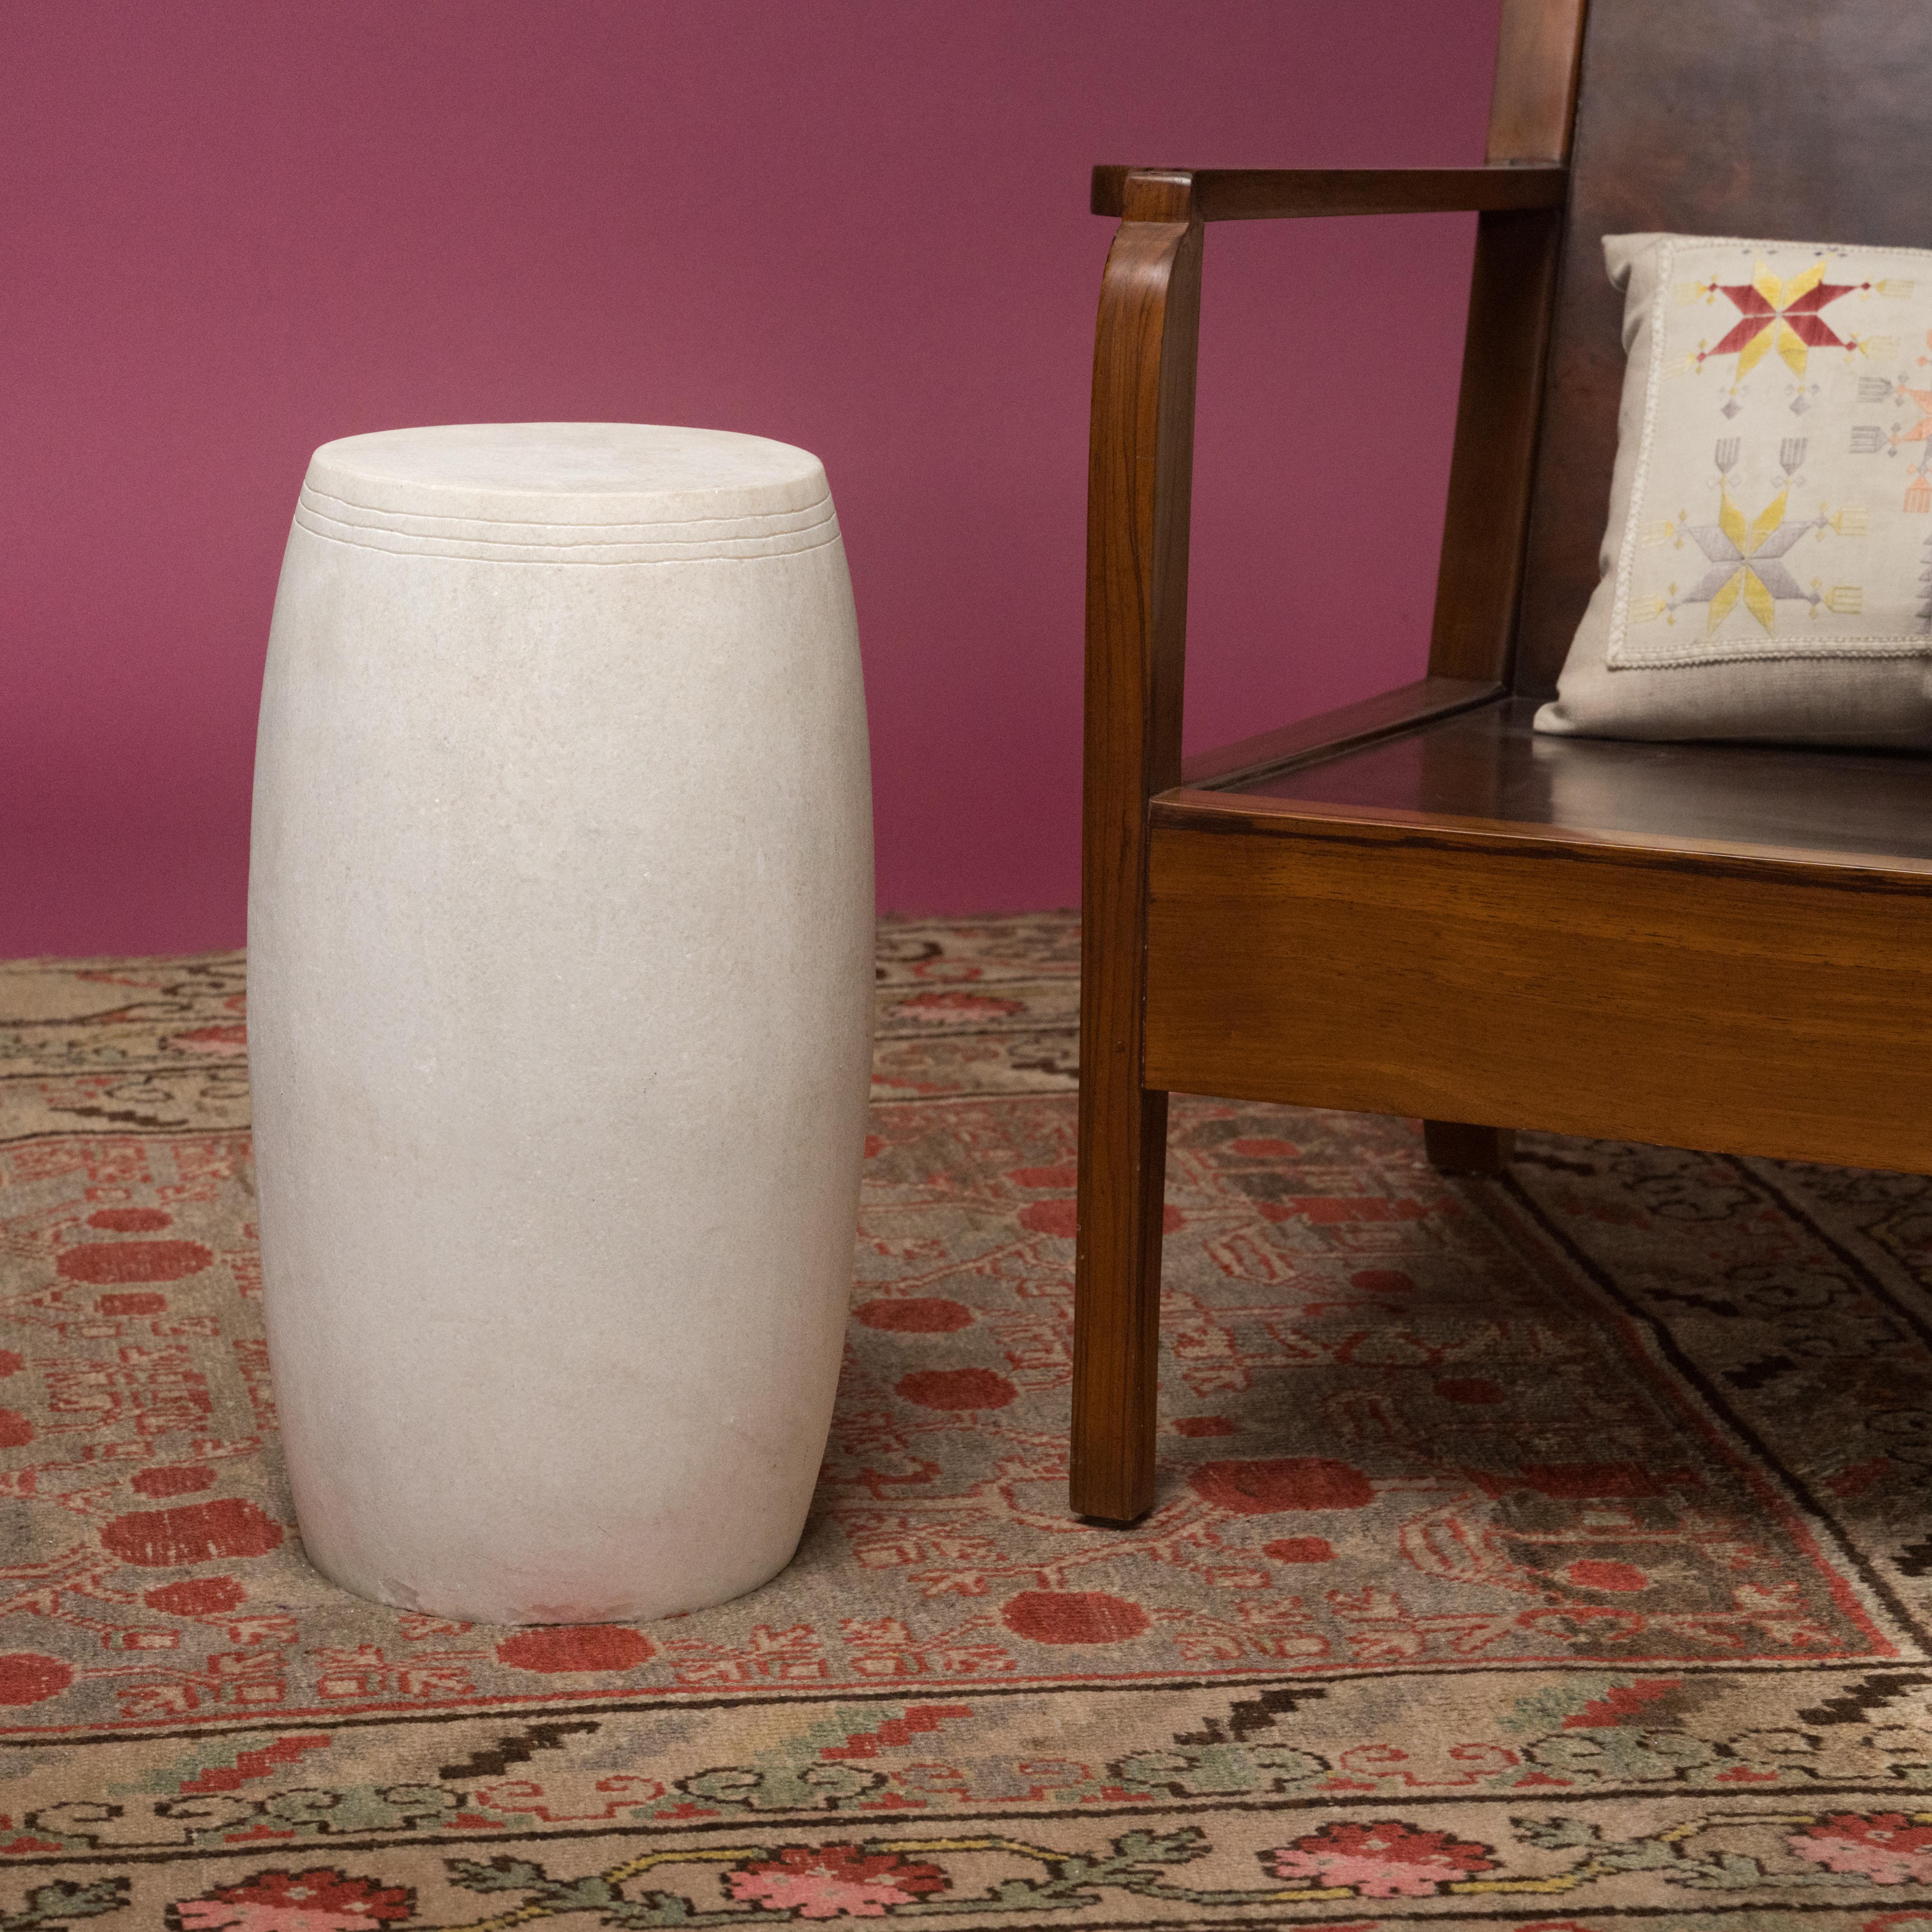 This narrow drum stool was carved from a solid block of white marble with a Minimalist tapered design. The stool is subtly etched with thin grooves around the top, suggestive of the lines drawn by stretched hide on an actual drum. Traditionally used